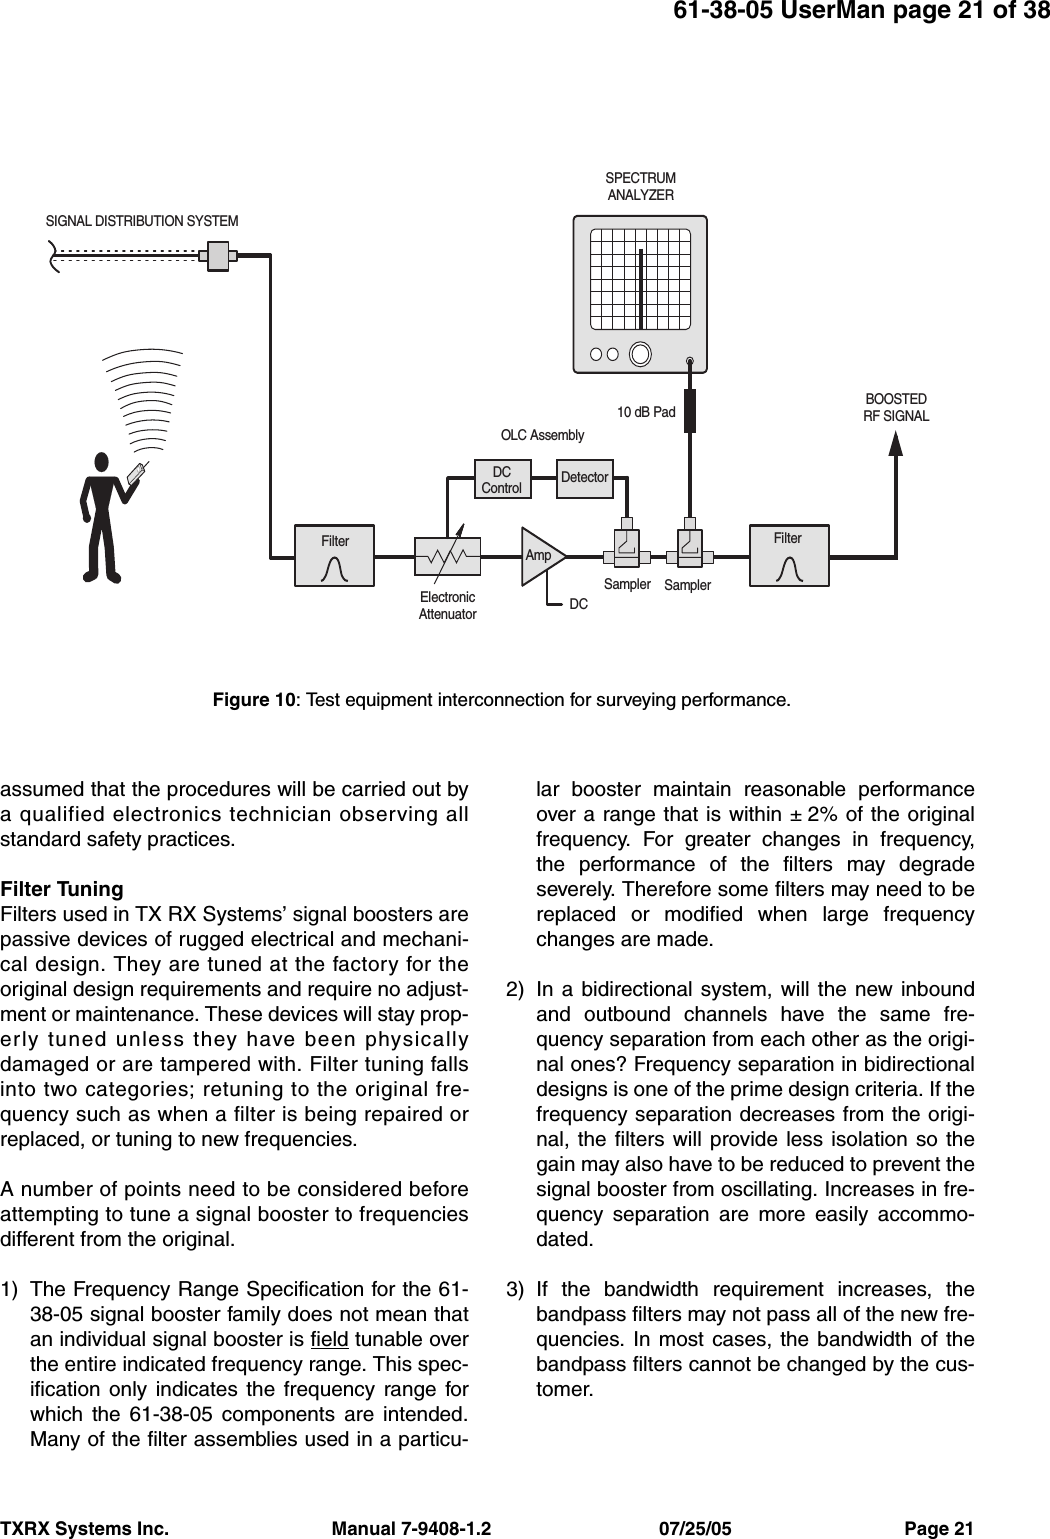 TXRX Systems Inc.                                Manual 7-9408-1.2                                 07/25/05                                  Page 2161-38-05 UserMan page 21 of 38assumed that the procedures will be carried out bya qualified electronics technician observing allstandard safety practices.Filter TuningFilters used in TX RX Systems’ signal boosters arepassive devices of rugged electrical and mechani-cal design. They are tuned at the factory for theoriginal design requirements and require no adjust-ment or maintenance. These devices will stay prop-erly tuned unless they have been physicallydamaged or are tampered with. Filter tuning fallsinto two categories; retuning to the original fre-quency such as when a filter is being repaired orreplaced, or tuning to new frequencies.A number of points need to be considered beforeattempting to tune a signal booster to frequenciesdifferent from the original.1) The Frequency Range Specification for the 61-38-05 signal booster family does not mean thatan individual signal booster is field tunable overthe entire indicated frequency range. This spec-ification only indicates the frequency range forwhich the 61-38-05 components are intended.Many of the filter assemblies used in a particu-lar booster maintain reasonable performanceover a range that is within ± 2% of the originalfrequency. For greater changes in frequency,the performance of the filters may degradeseverely. Therefore some filters may need to bereplaced or modified when large frequencychanges are made.2) In a bidirectional system, will the new inboundand outbound channels have the same fre-quency separation from each other as the origi-nal ones? Frequency separation in bidirectionaldesigns is one of the prime design criteria. If thefrequency separation decreases from the origi-nal, the filters will provide less isolation so thegain may also have to be reduced to prevent thesignal booster from oscillating. Increases in fre-quency separation are more easily accommo-dated.3) If the bandwidth requirement increases, thebandpass filters may not pass all of the new fre-quencies. In most cases, the bandwidth of thebandpass filters cannot be changed by the cus-tomer.  DCSampler SamplerDetectorElectronicAttenuatorOLC AssemblyFilter FilterAmpDCControl10 dB PadSPECTRUMANALYZERSIGNAL DISTRIBUTION SYSTEMBOOSTEDRF SIGNALFigure 10: Test equipment interconnection for surveying performance.